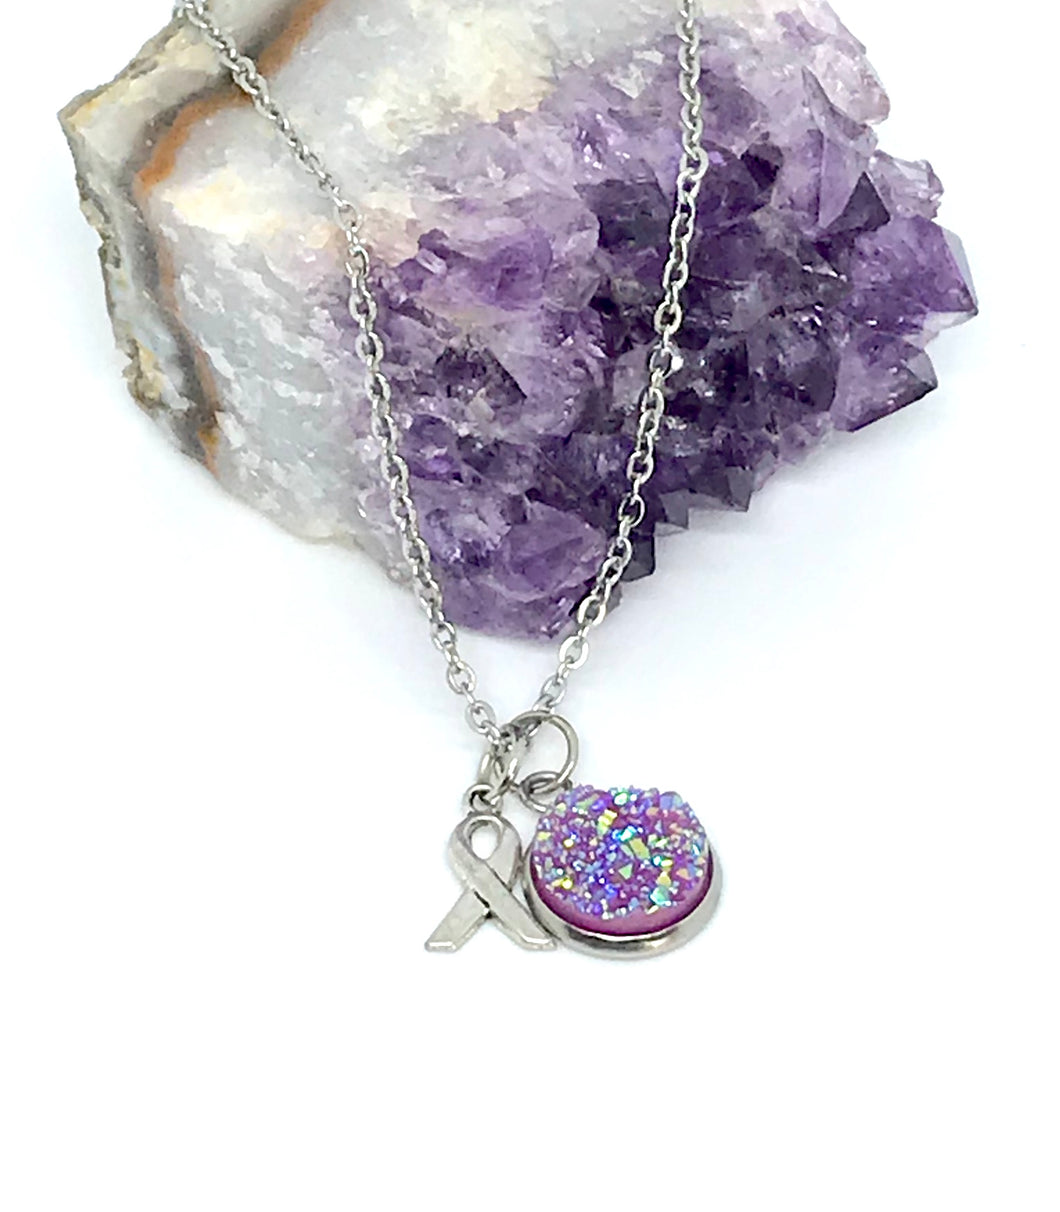 Pancreatic Cancer Research Necklace (Stainless Steel)